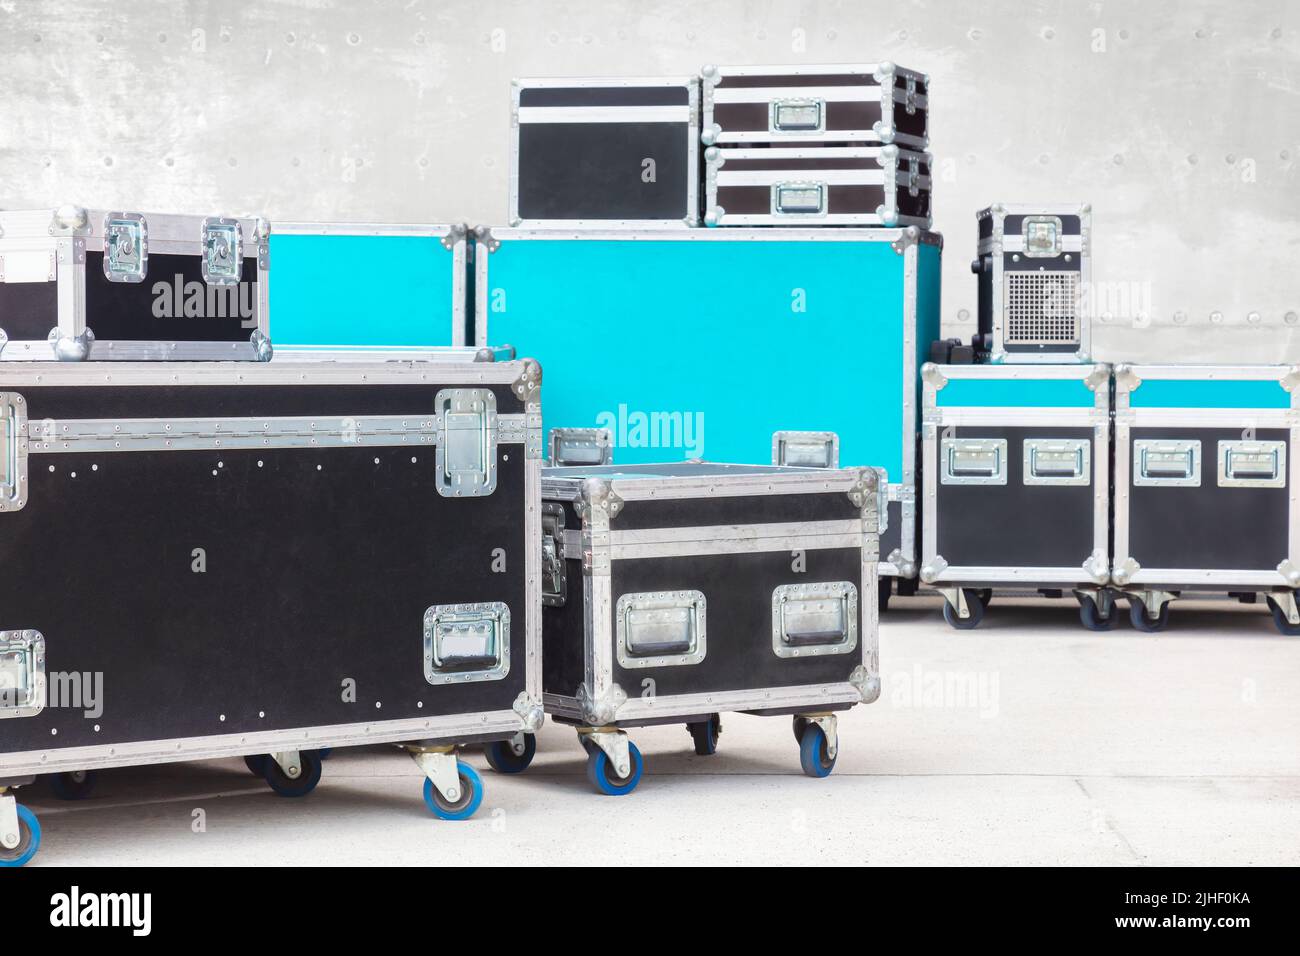 Group of black and blue flight cases on a concrete floor Stock Photo